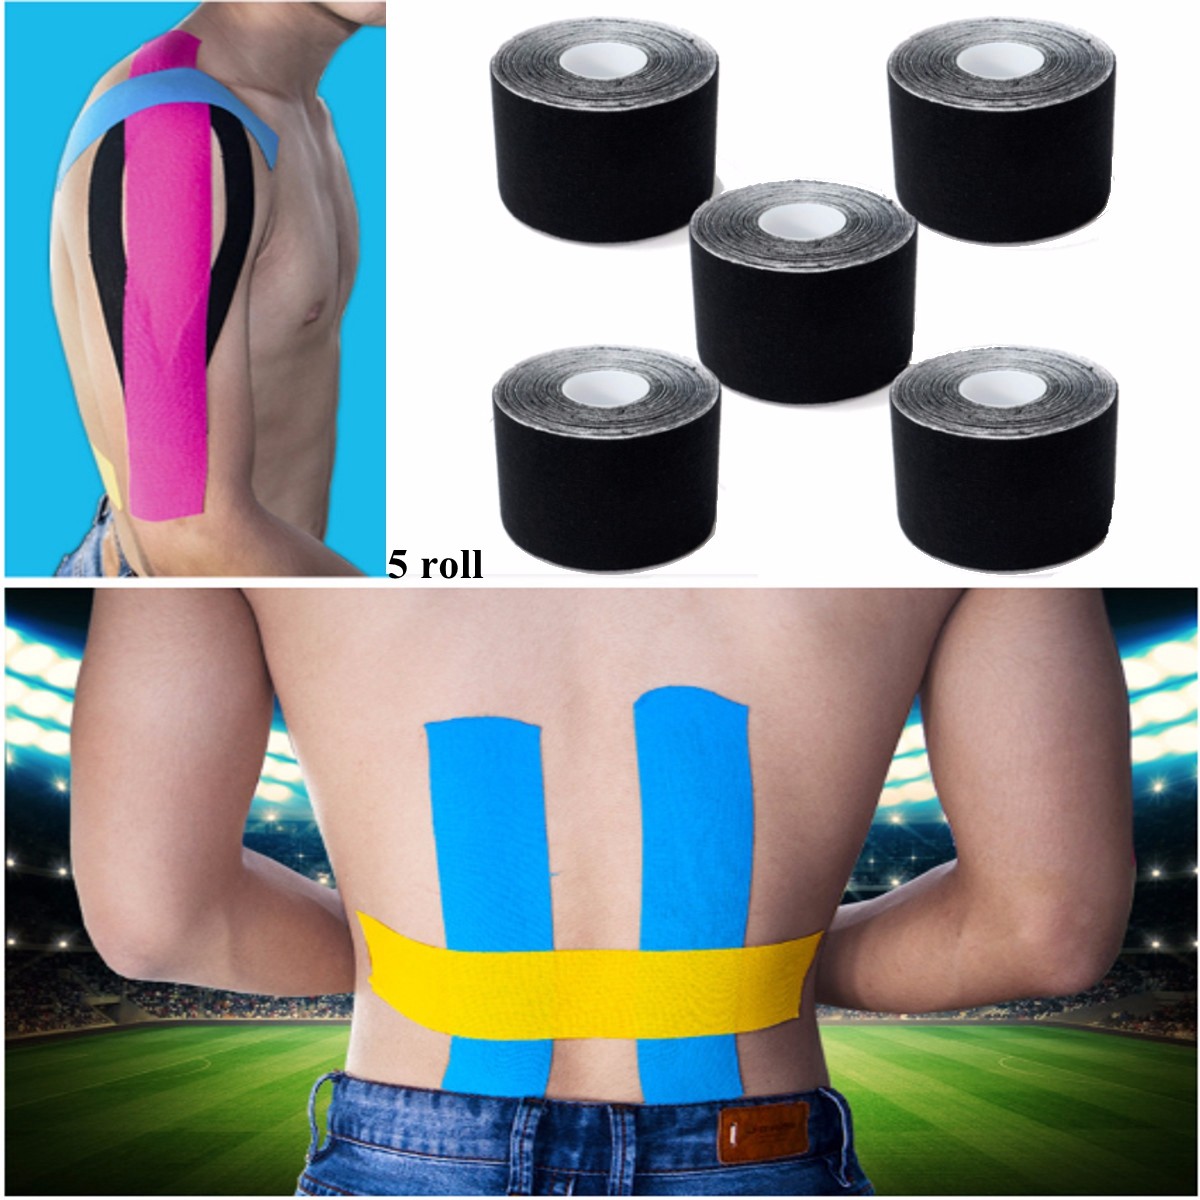 5-Rolls-5m5cm-Self-adhesive-Muscle-Strain-Sport-Support-Tape-Physio-Therapeutic-1123771